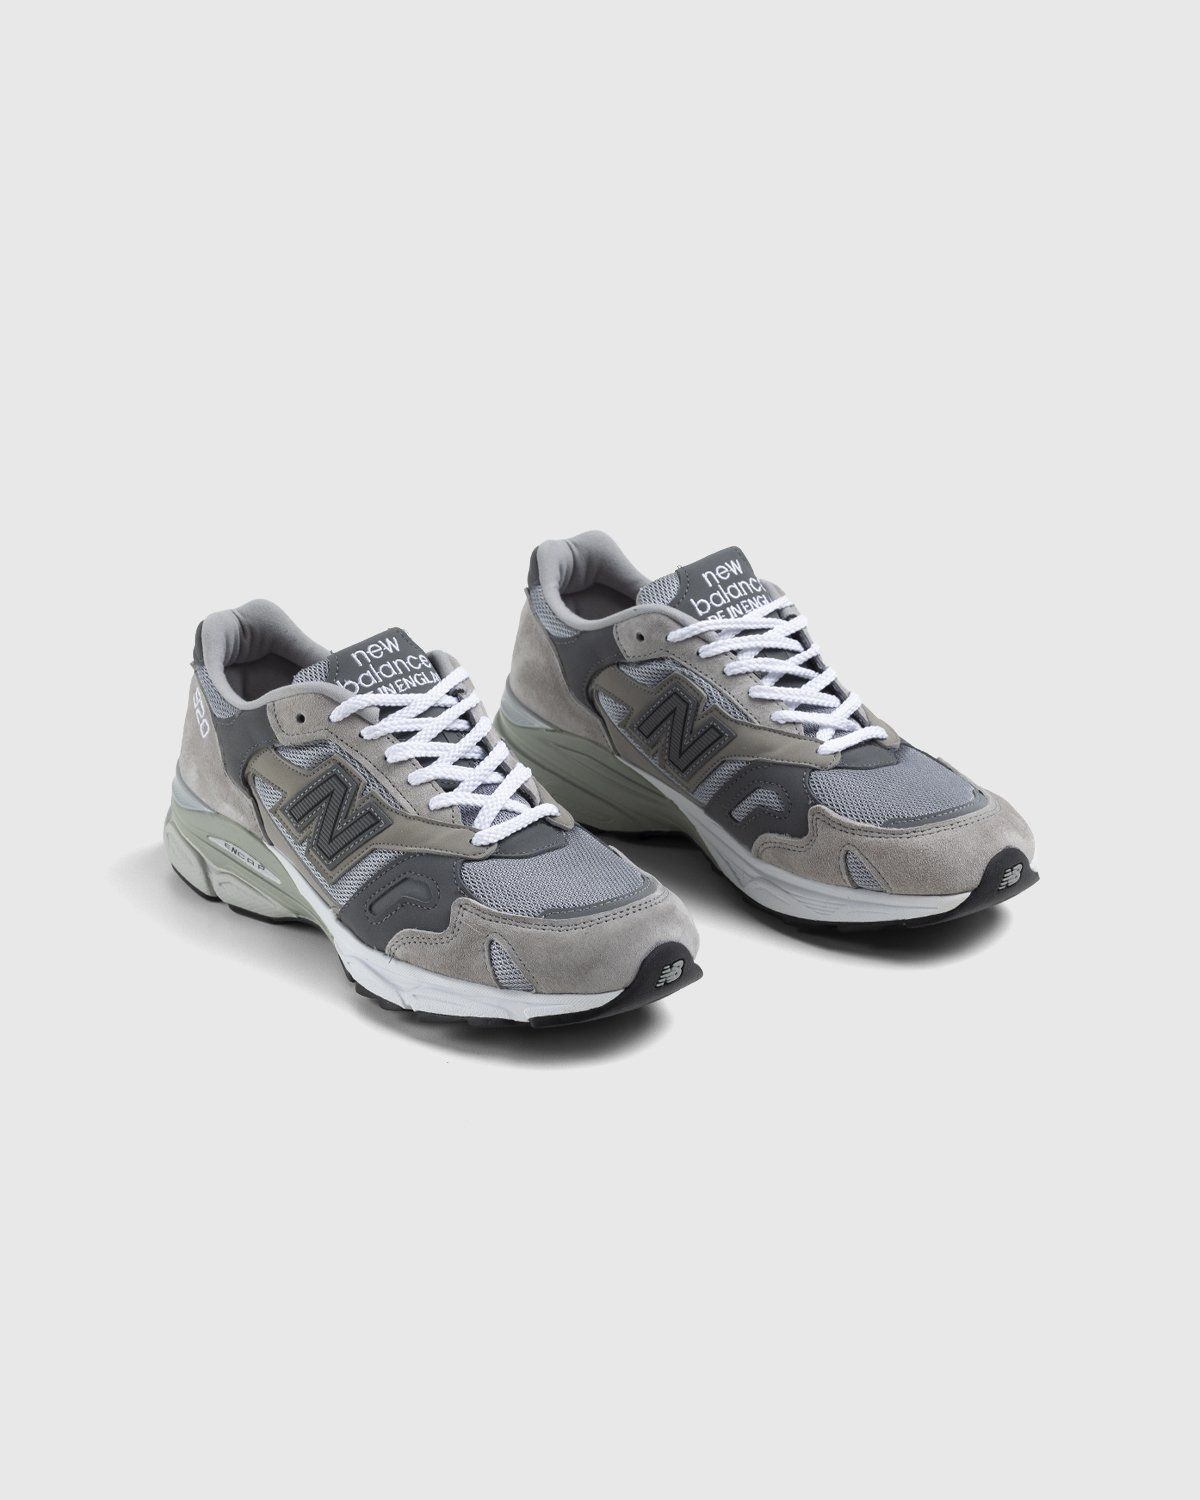 New Balance – M920GRY Grey - Sneakers - Grey - Image 3